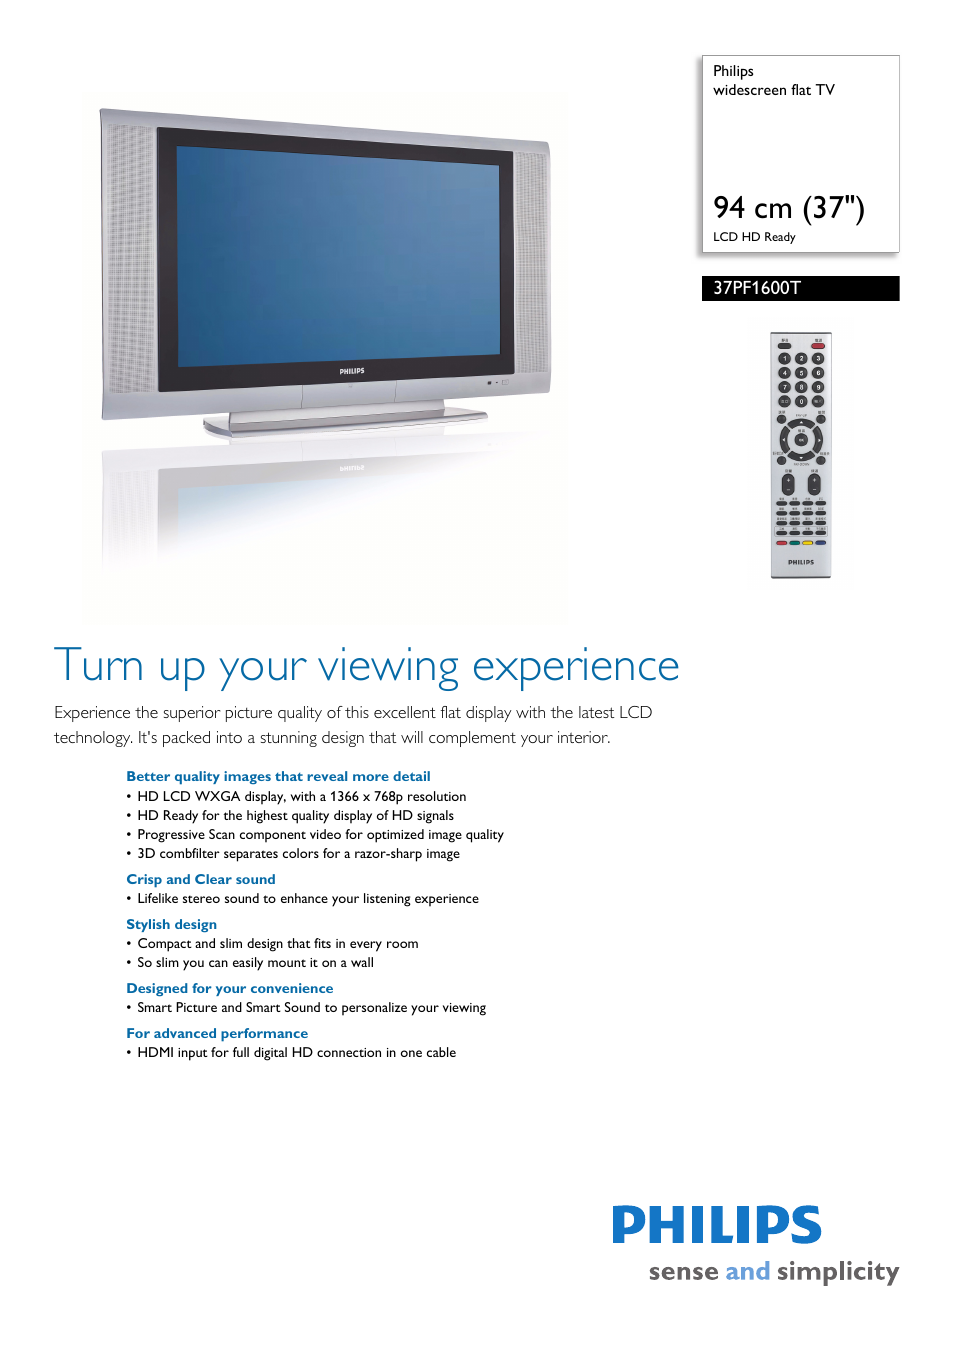 Philips widescreen flat TV 37PF1600T User Manual | 2 pages